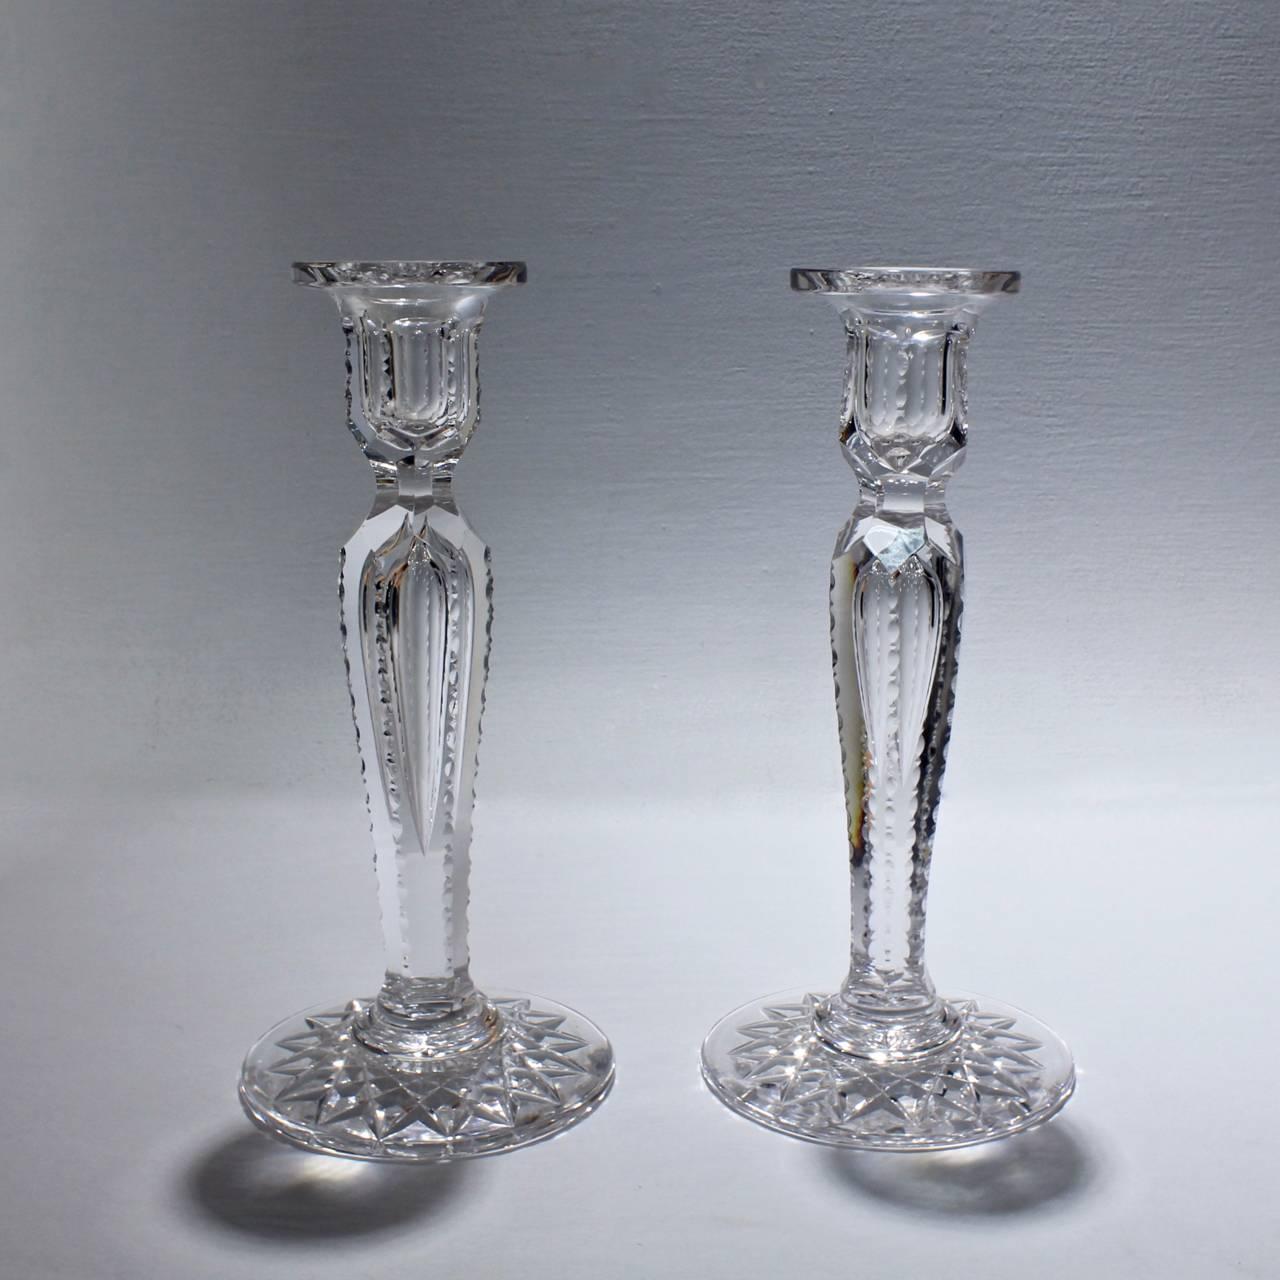 A very good pair of American cut-glass candlesticks.

Likely of the American brilliant period.

Bases unmarked.

Height: ca. 9 1/8 in.

Items purchased from David Sterner antiques must delight you. Purchases may be returned for any reason